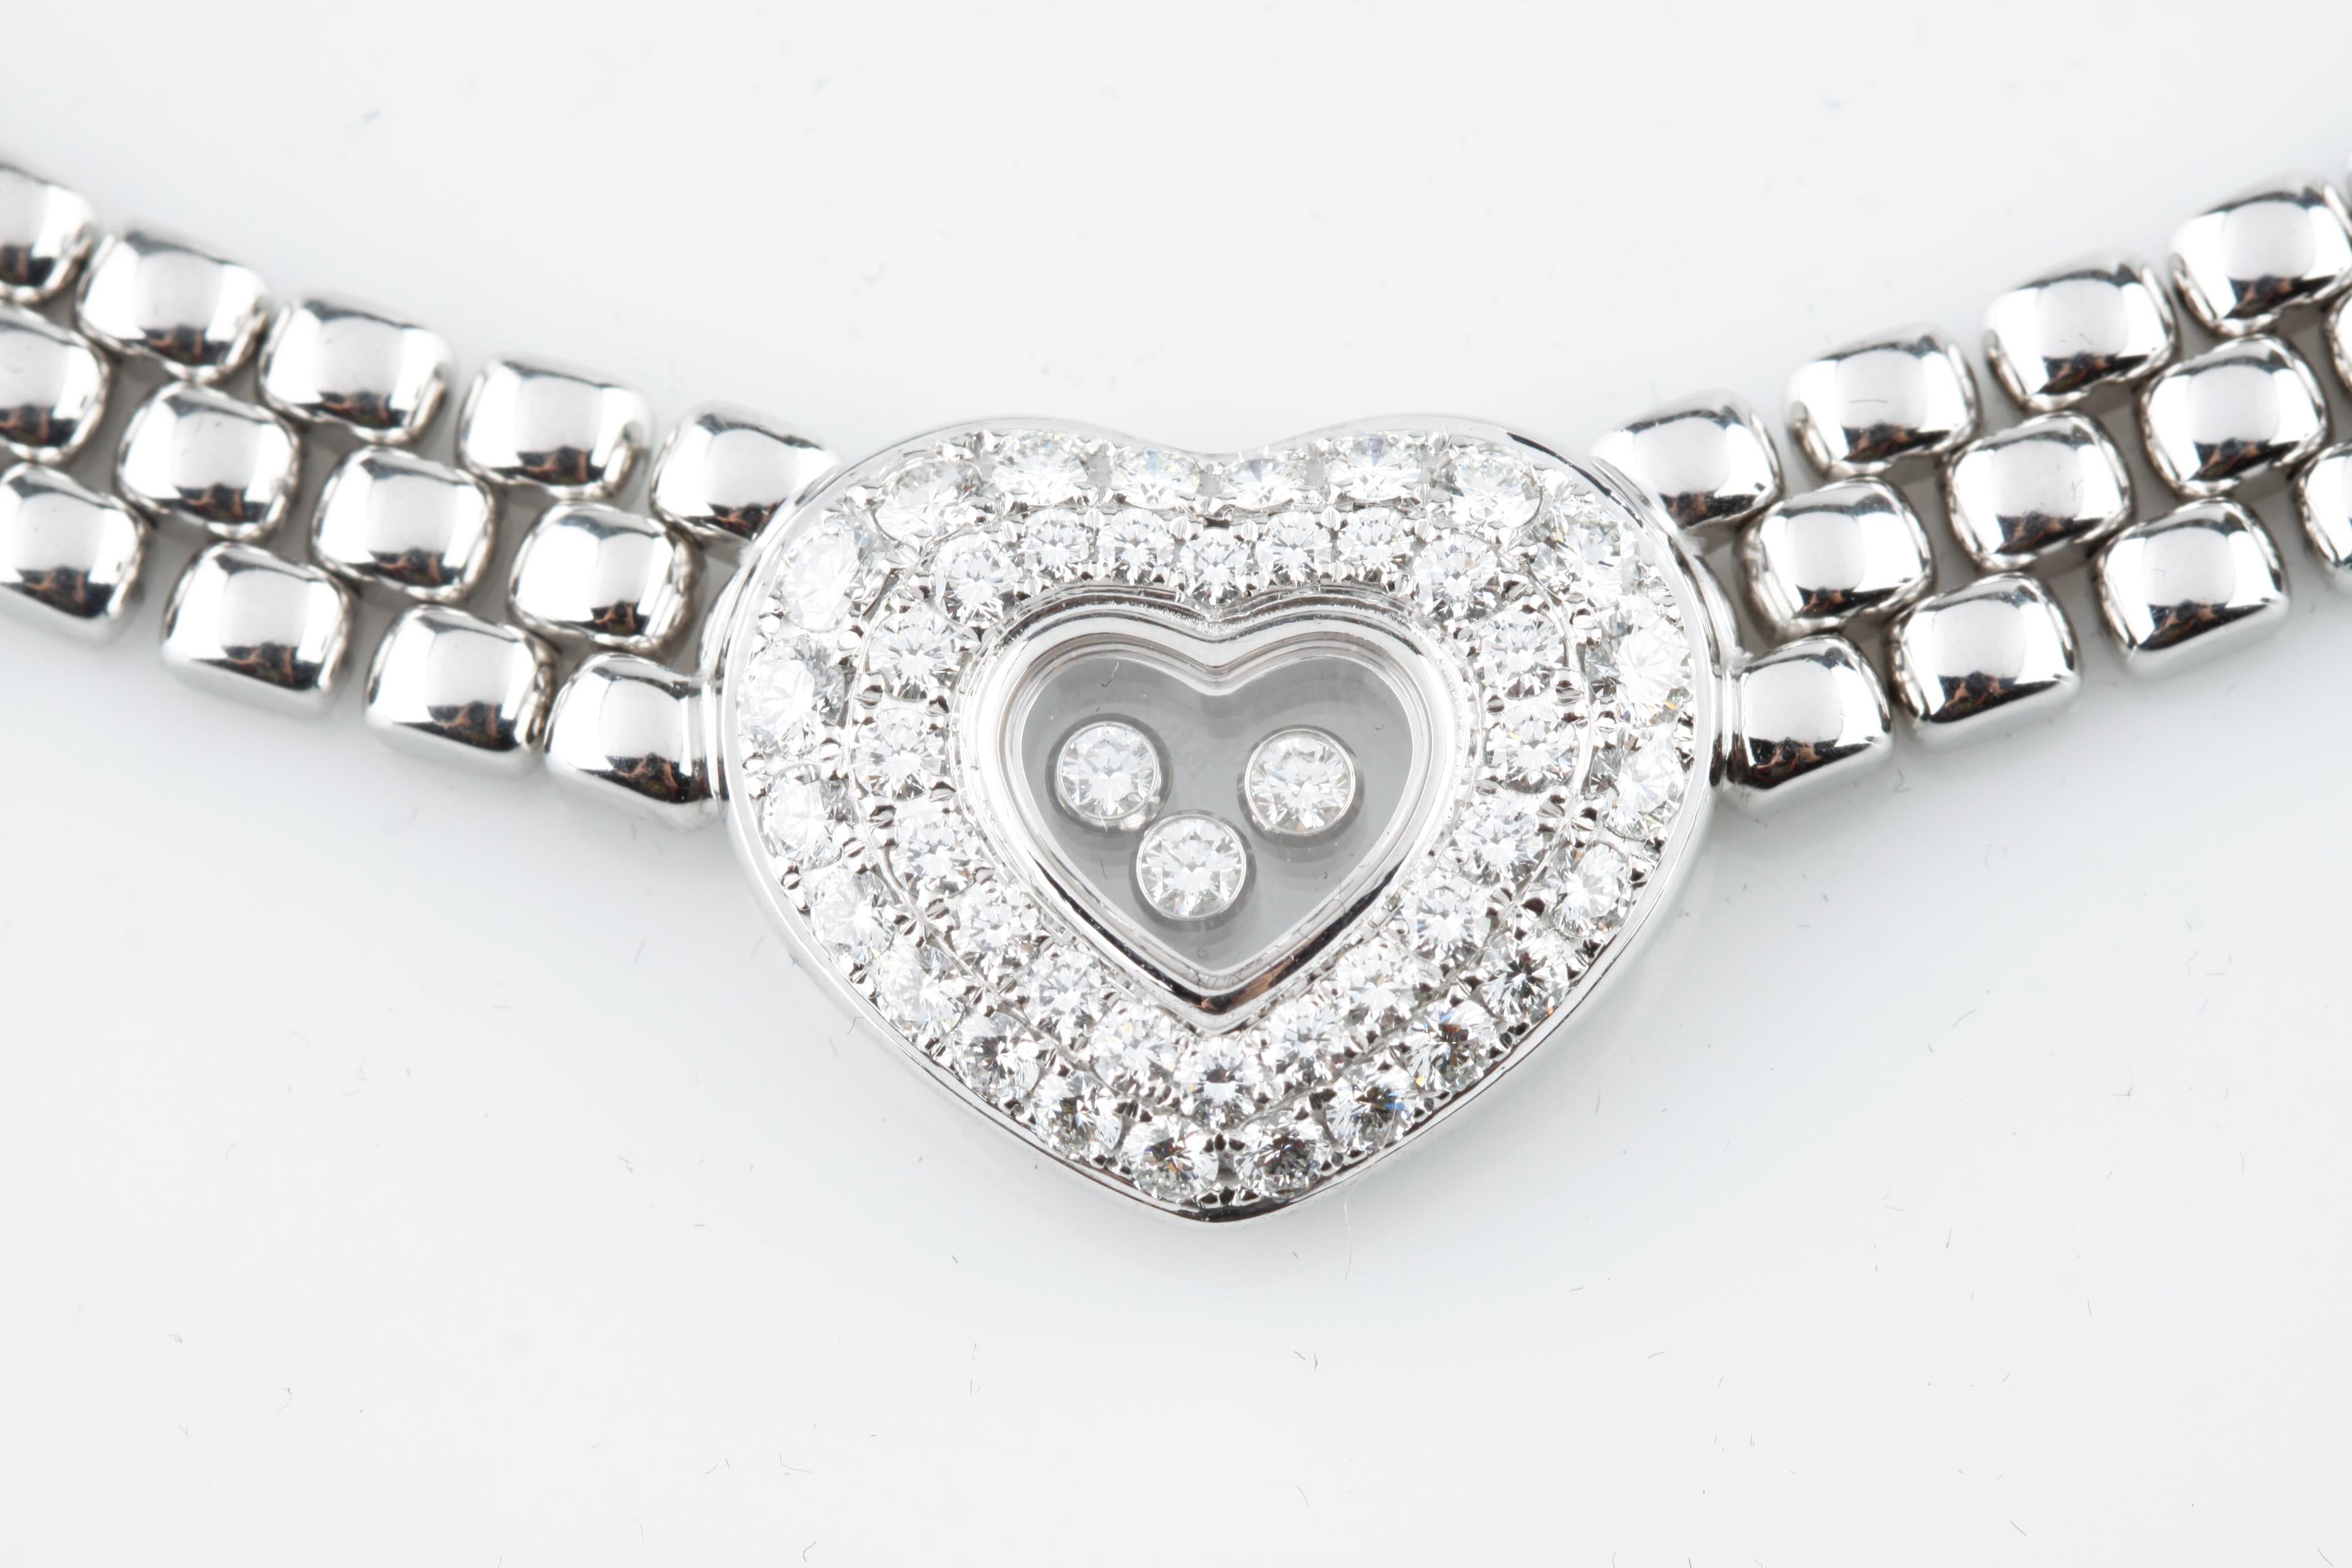 Gorgeous Chopard Happy Diamond series choker done in solid 18K White Gold 
Triple row necklace design showcasing a diamond incrusted Heart Pendant
45 total Diamonds Bezel-set surrounding the heart-shaped Pendant 
3 loose 